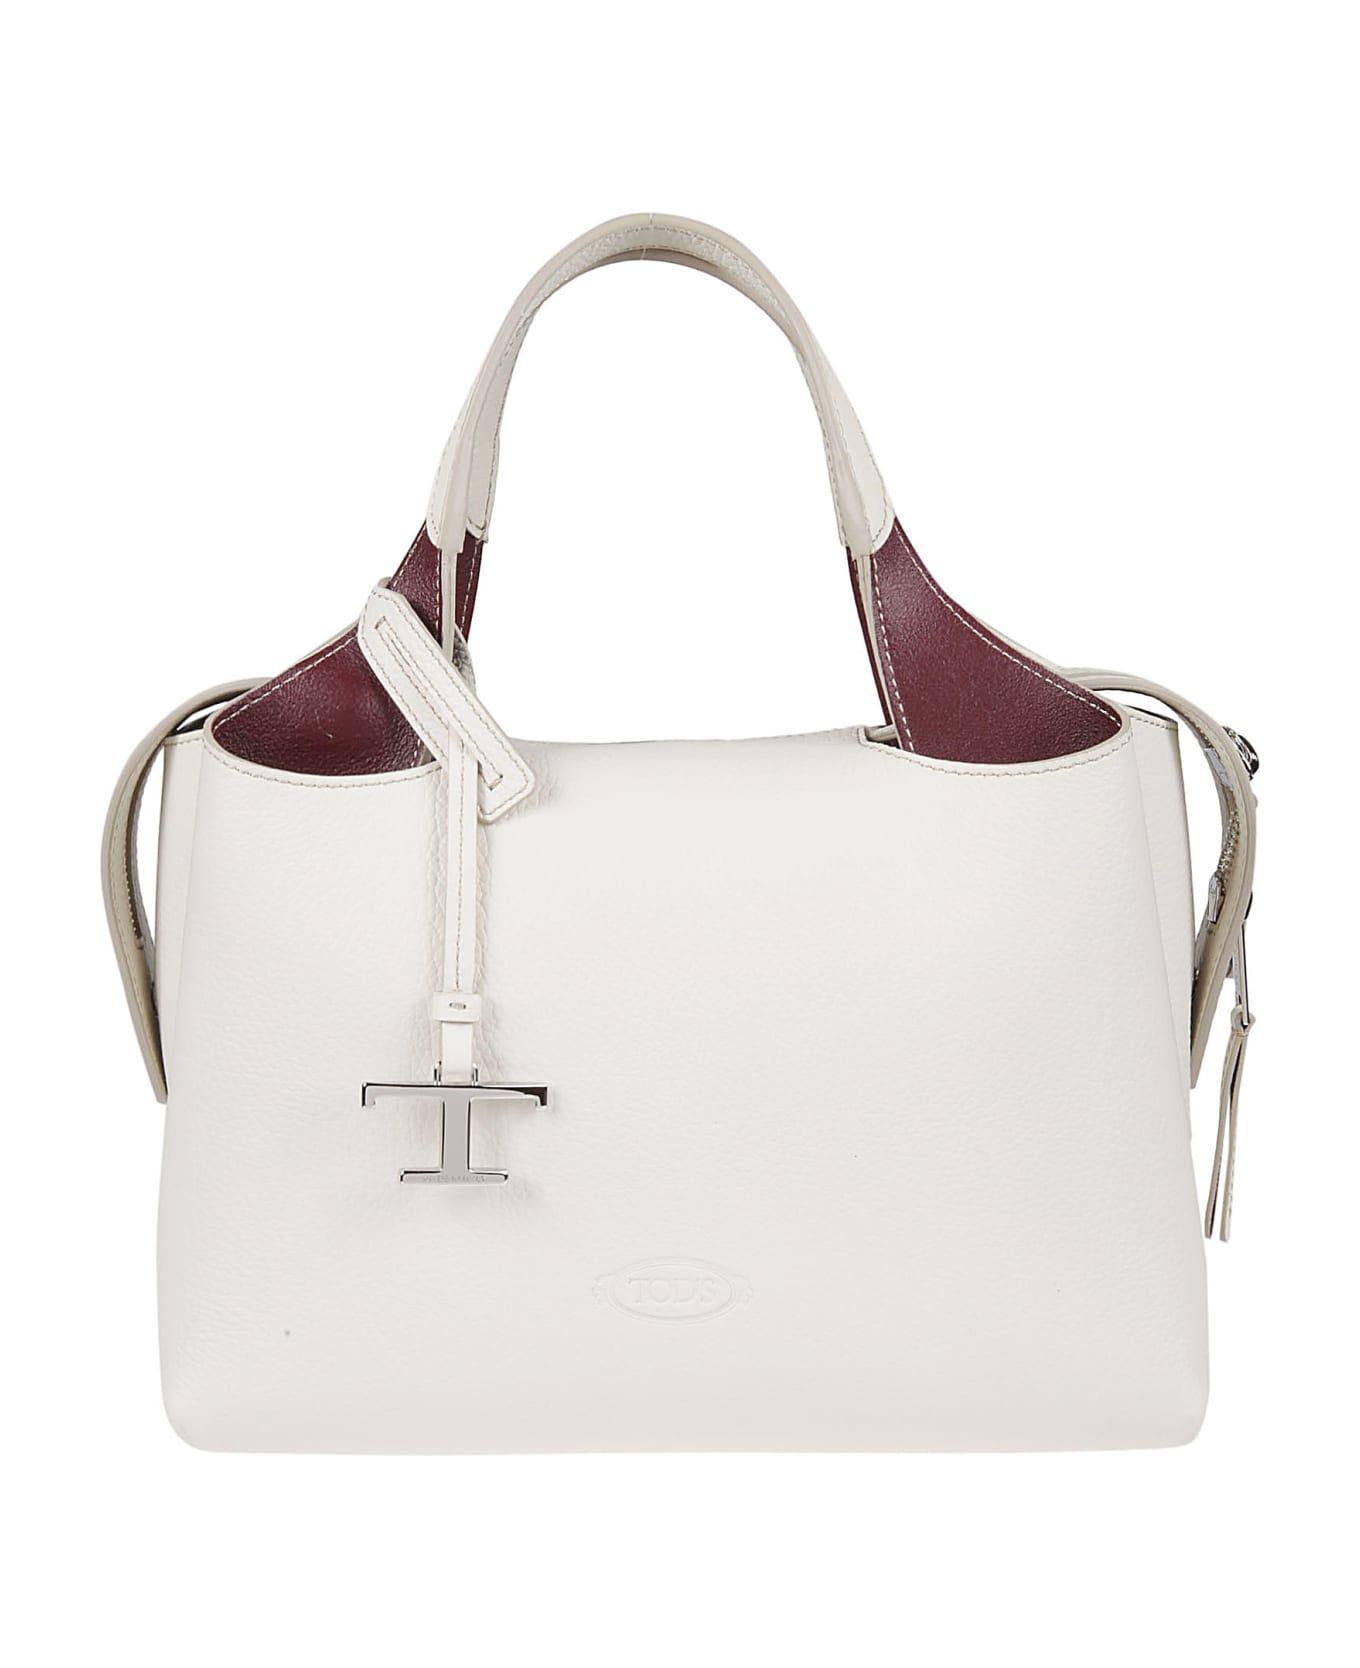 Tod's Top Zipped Dual Handle Tote - Bianco Calce/bordeaux Scuro トートバッグ